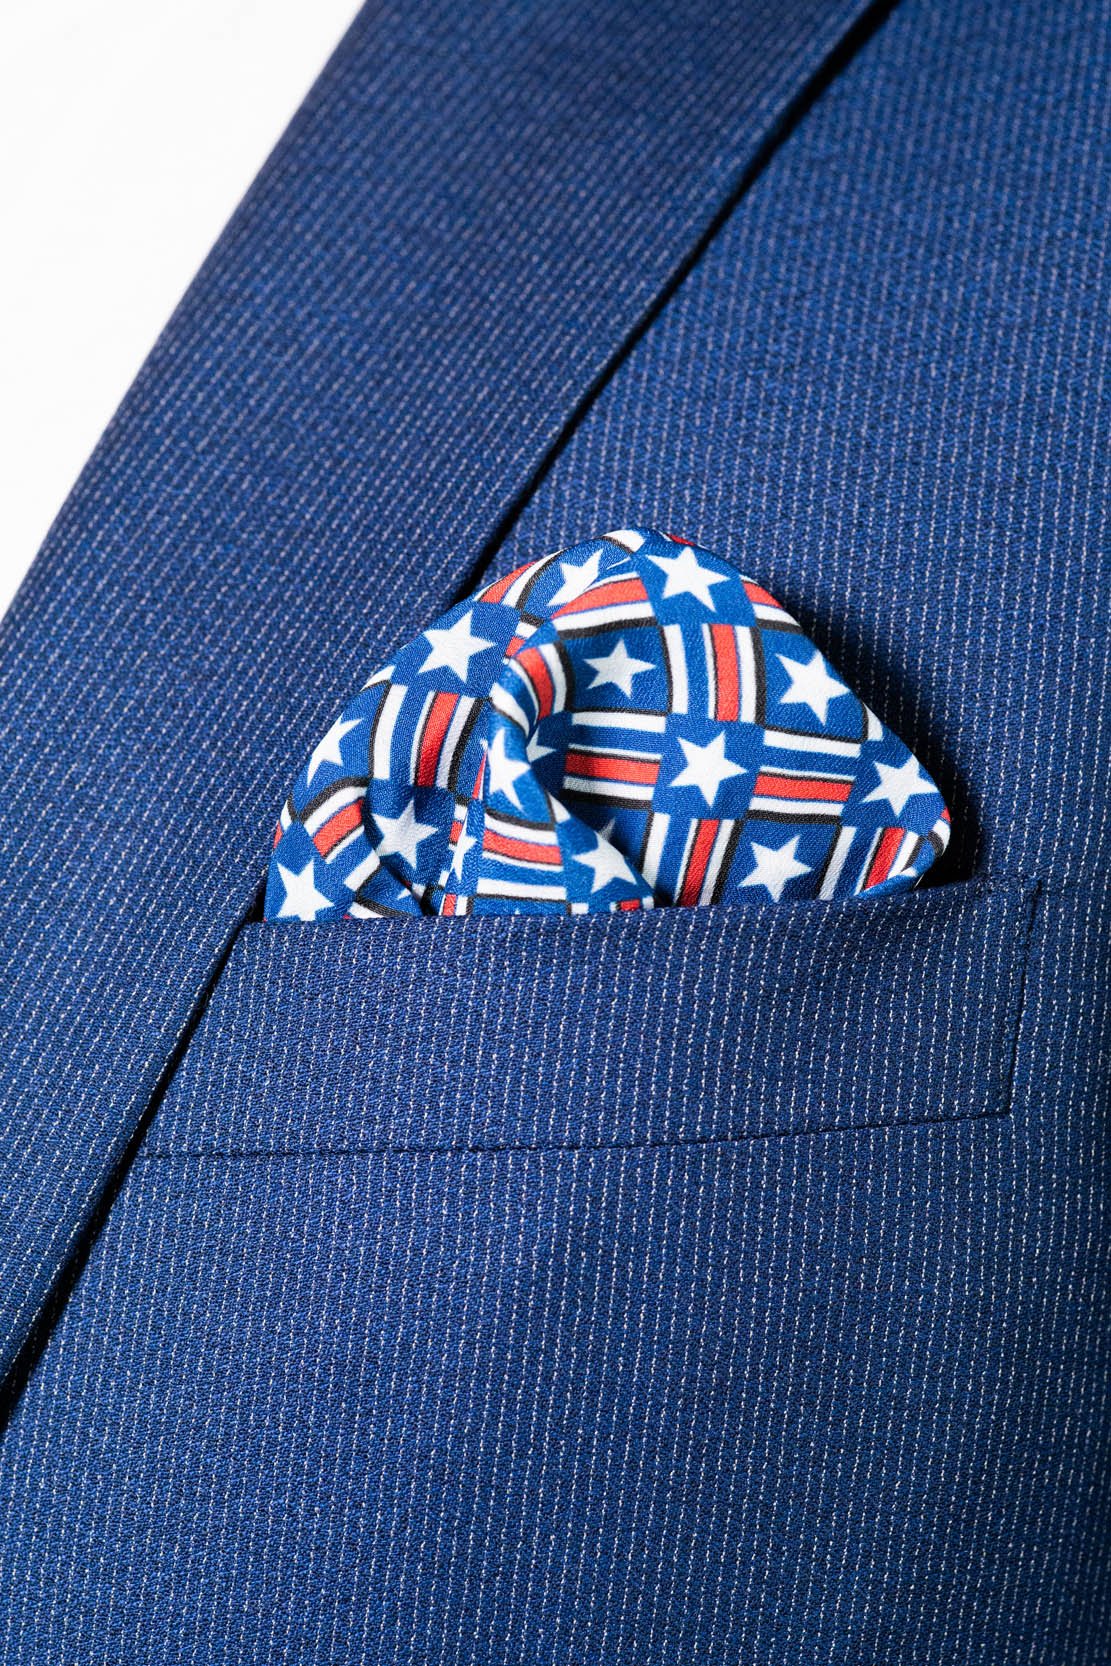 RARE CUT's Old Glory Pocket Square Worn in a Suit Jacket